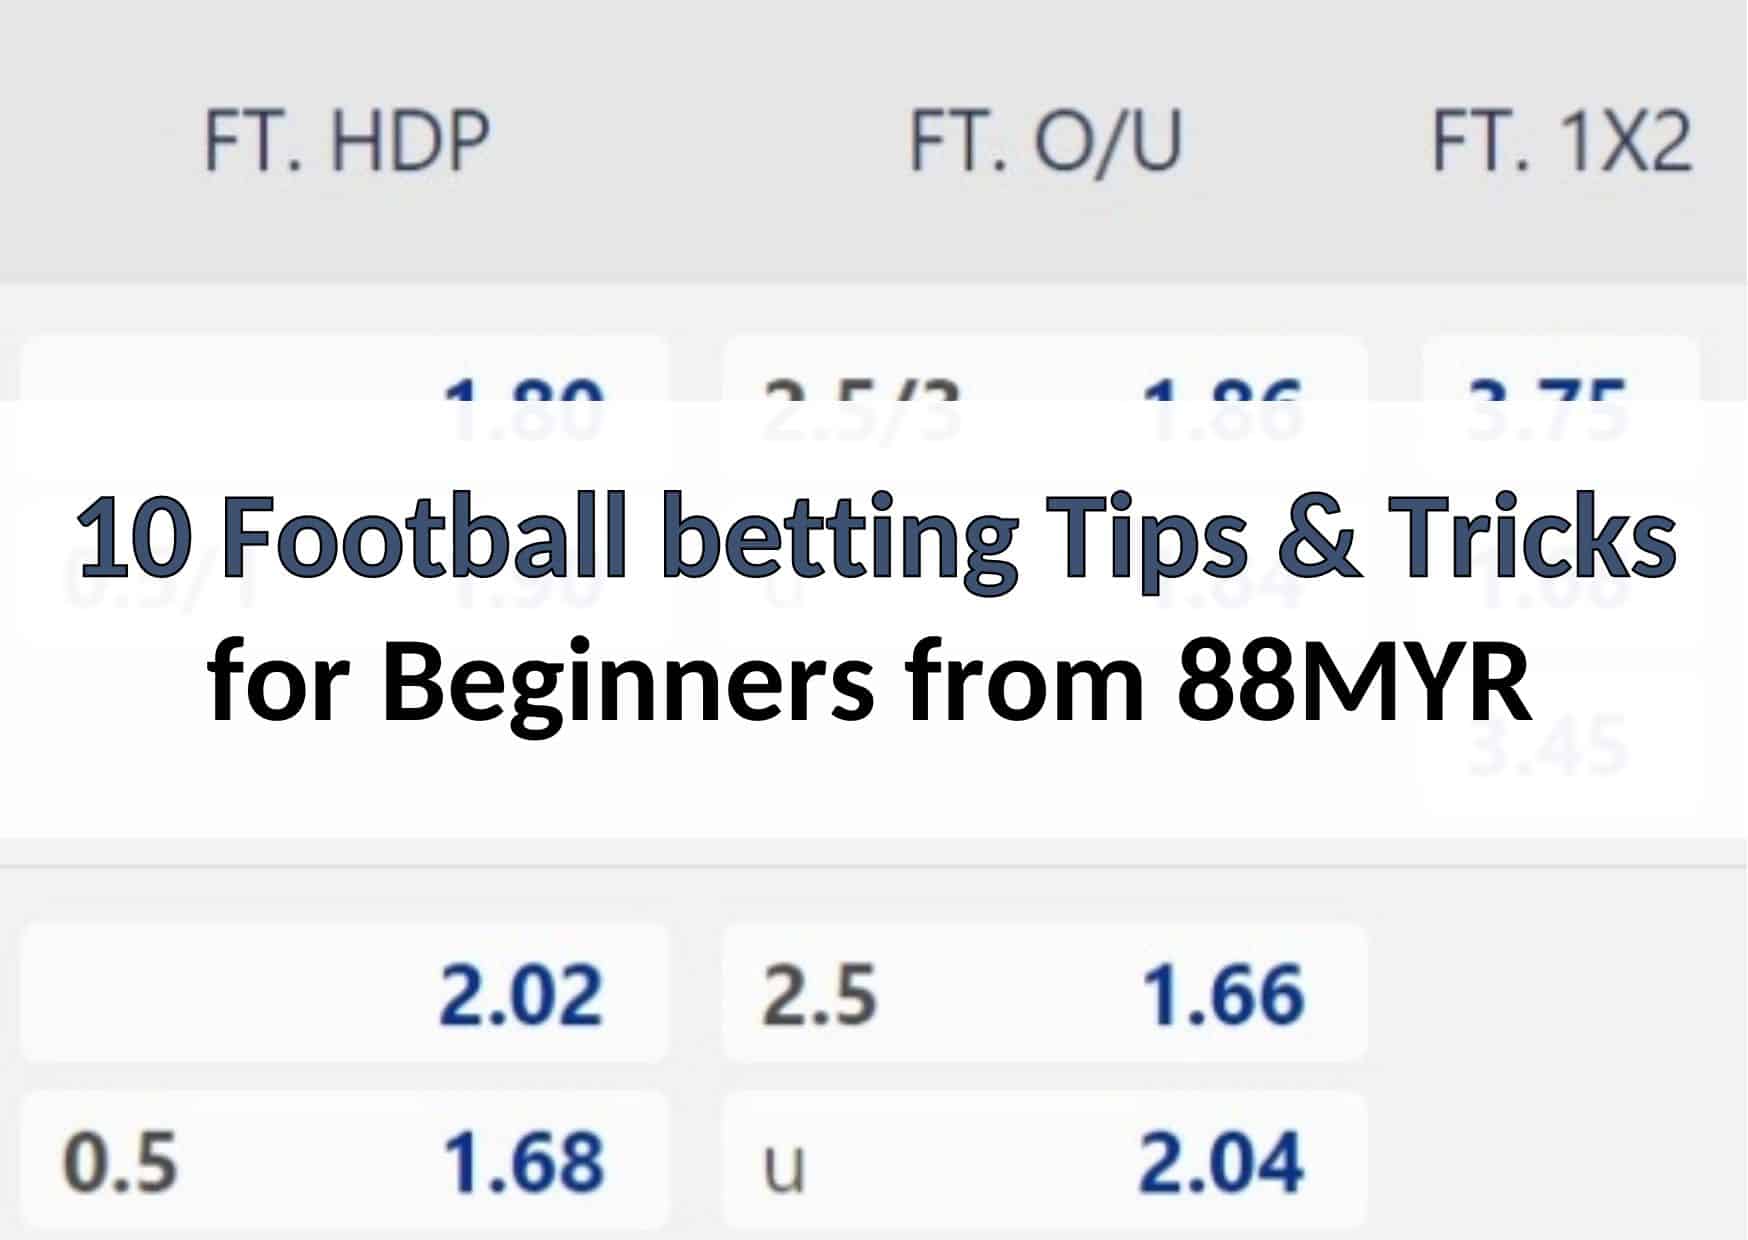 M88 10 football betting tips and tricks for beginners